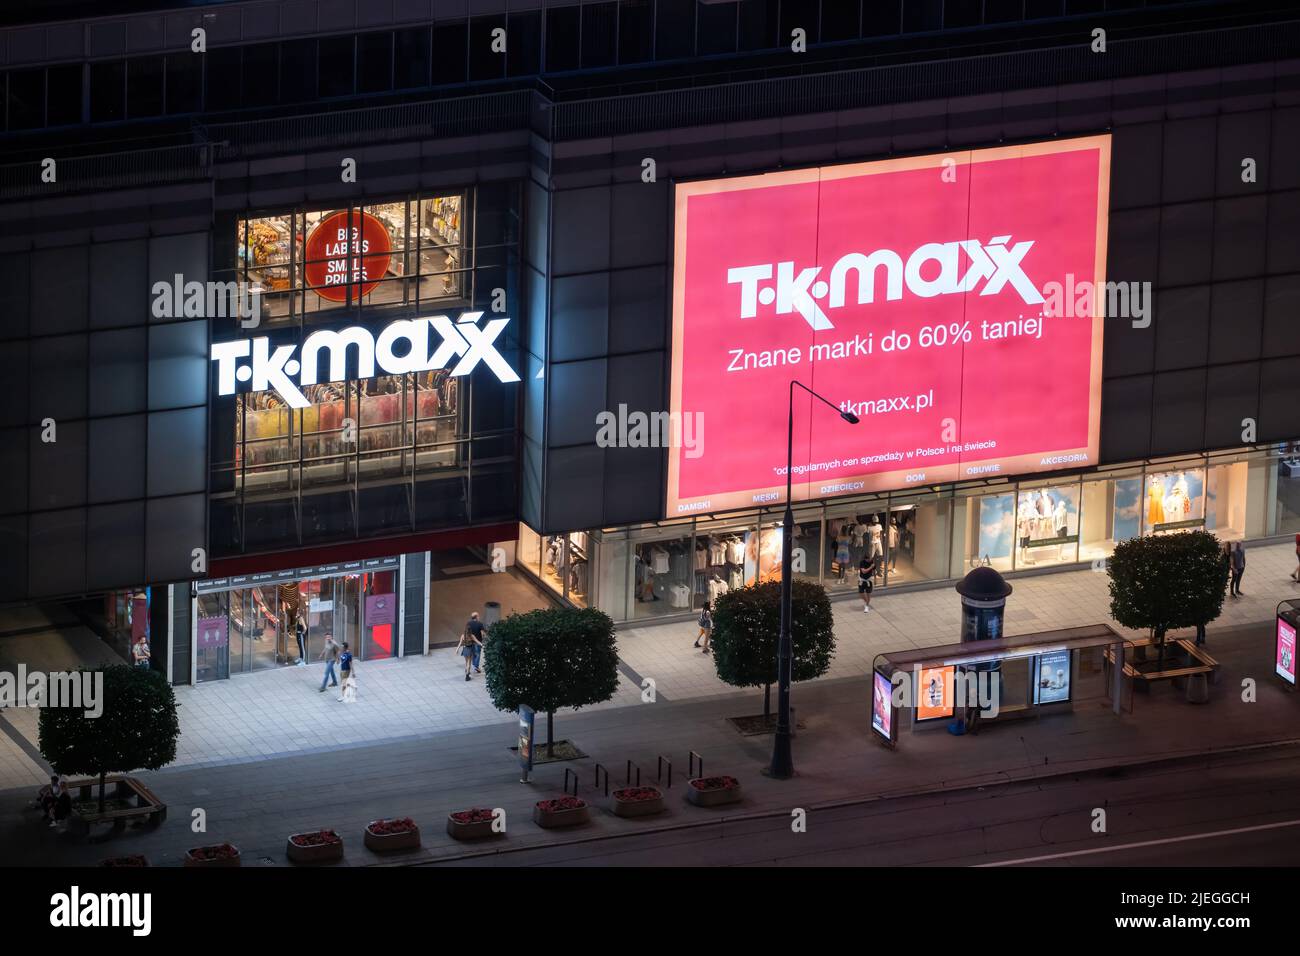 Warsaw, Poland - June 18, 2021: TK Maxx American department store in the city center at night, view from Marszalkowska Street. Stock Photo